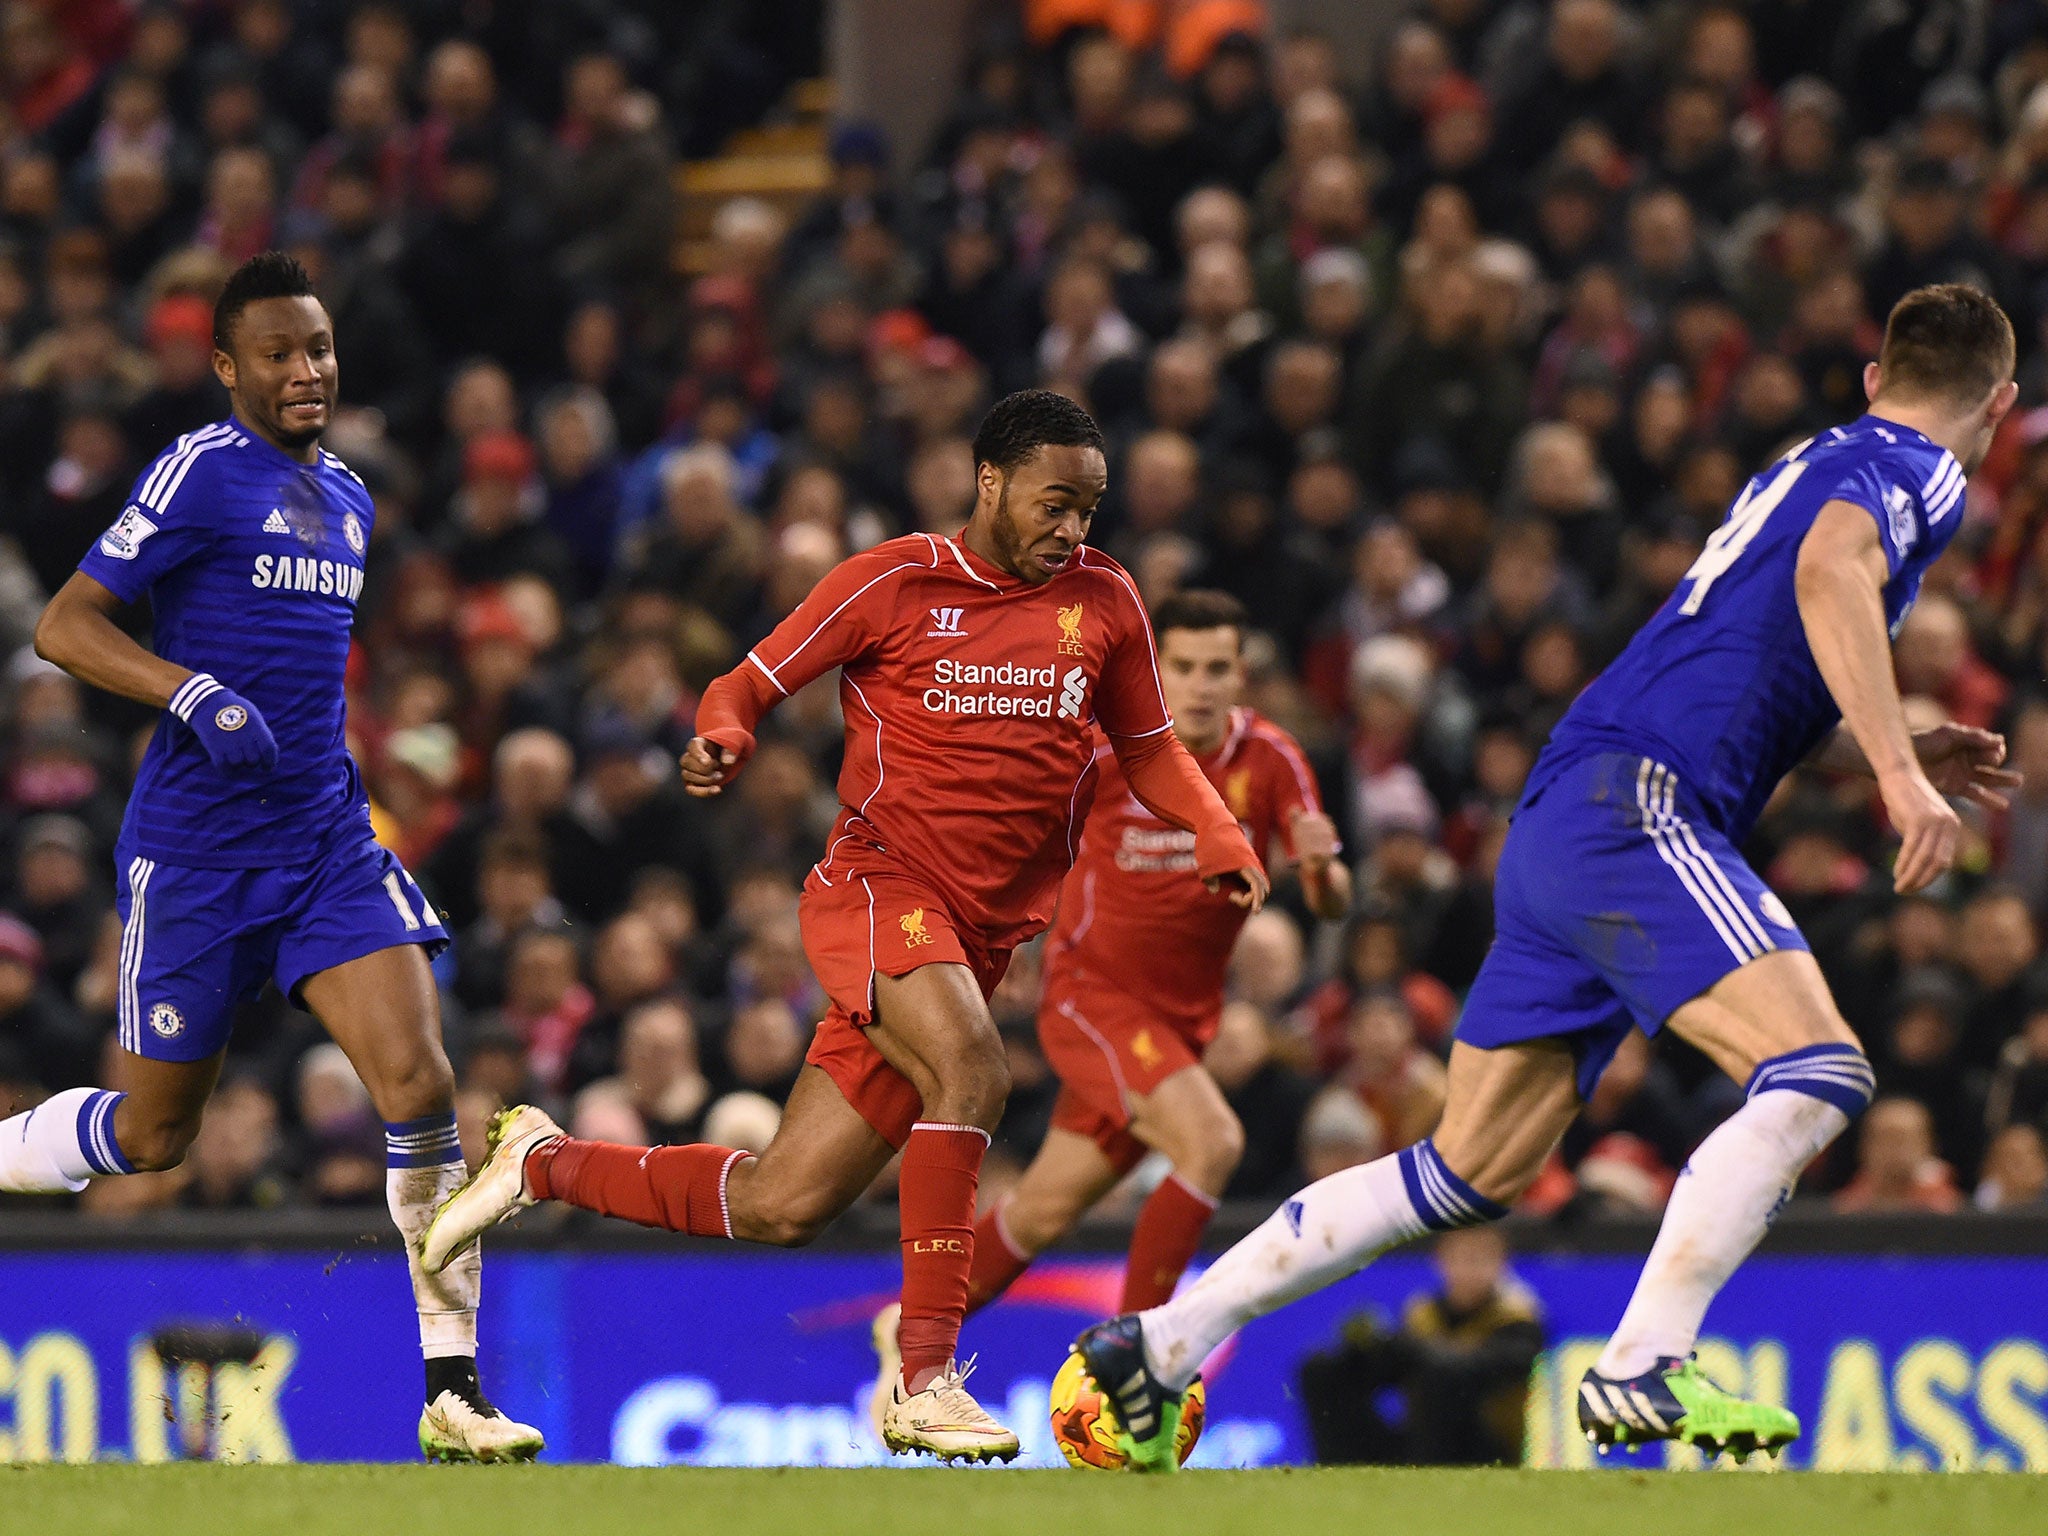 Raheem Sterling powers through the Chelsea defence